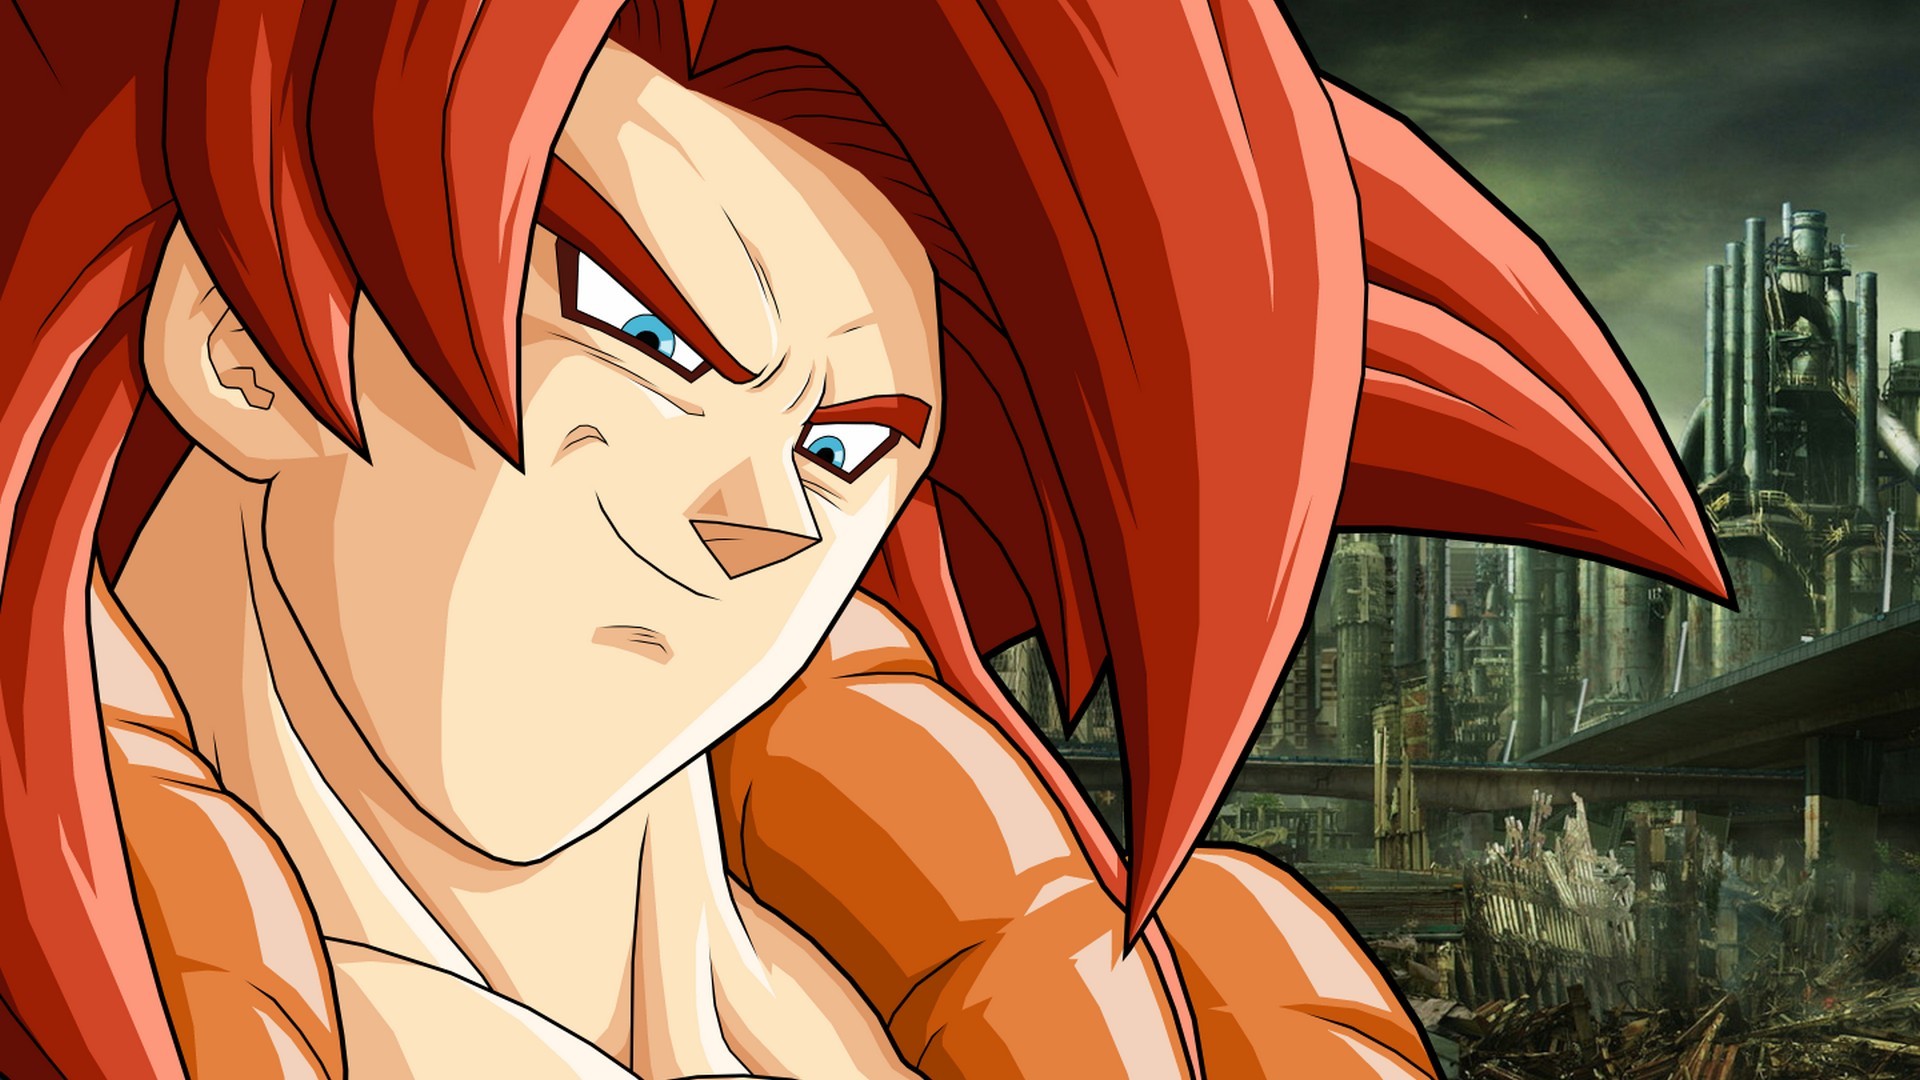 Wallpaper Goku SSJ4 Desktop with image resolution 1920x1080 pixel. You can use this wallpaper as background for your desktop Computer Screensavers, Android or iPhone smartphones